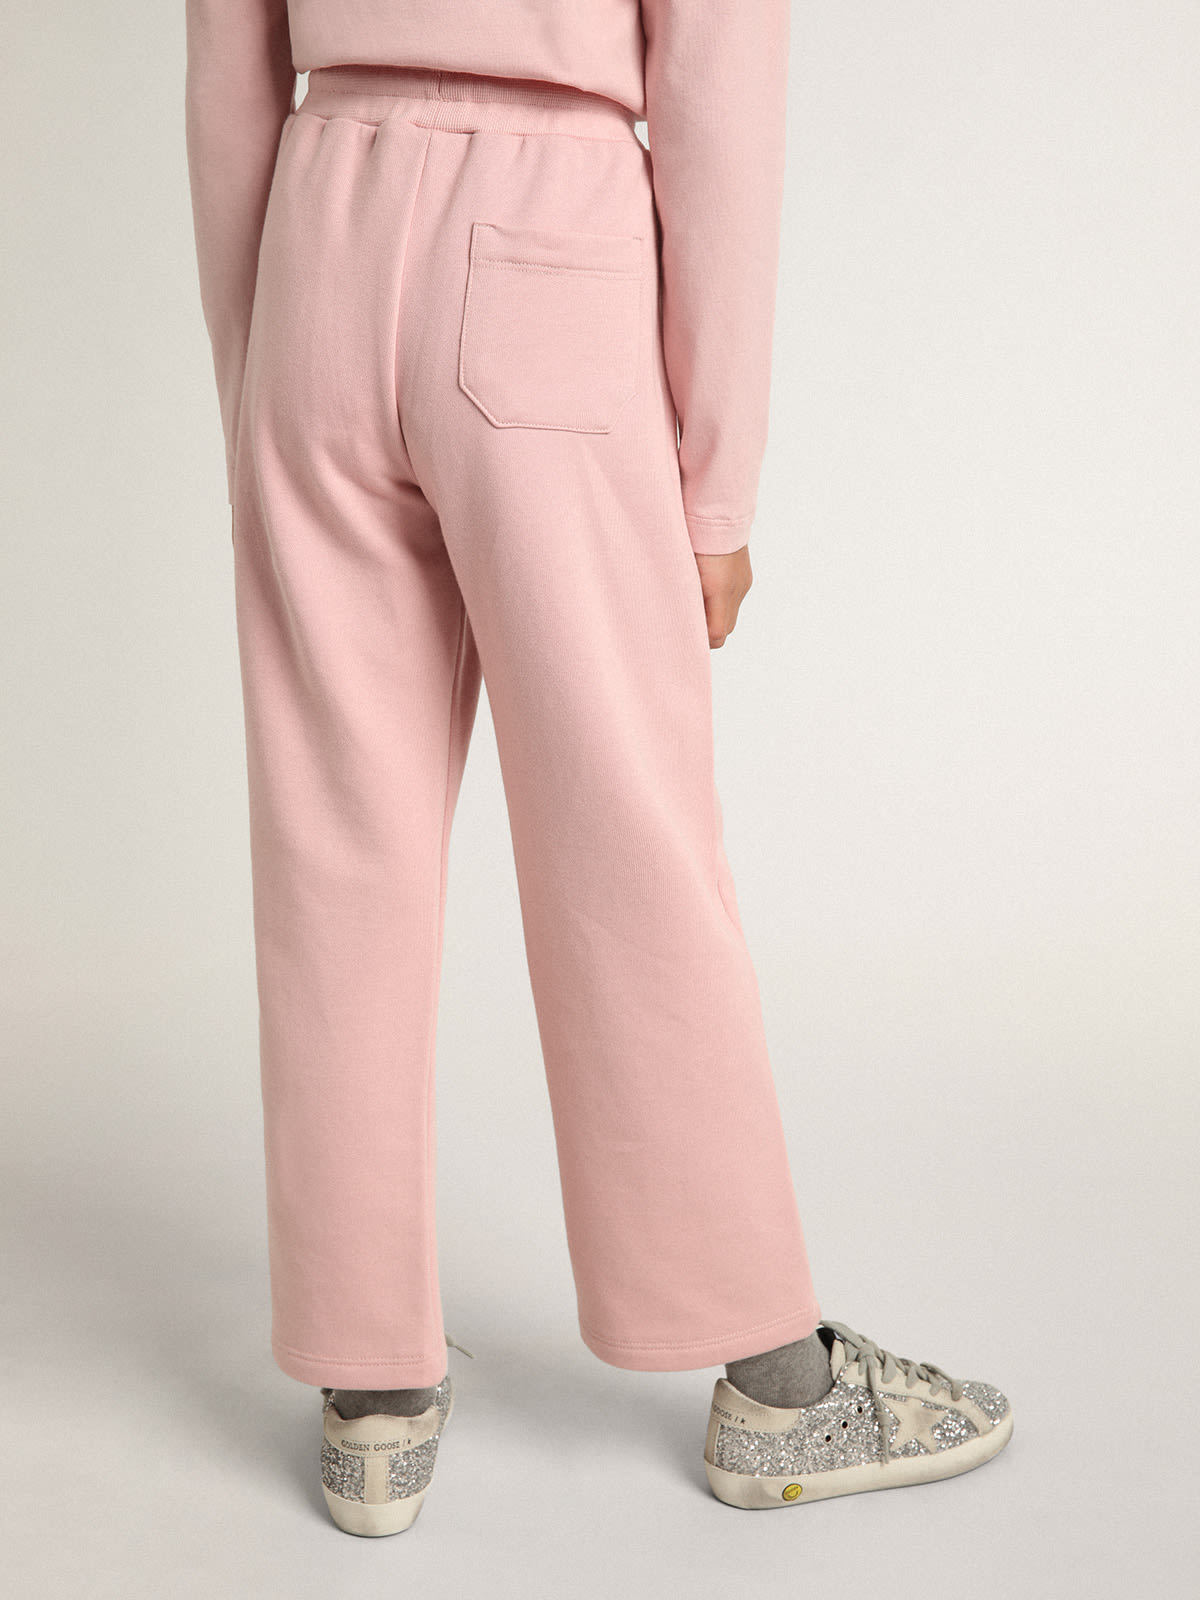 Pink Star Collection jogging pants with silver glitter star on the front